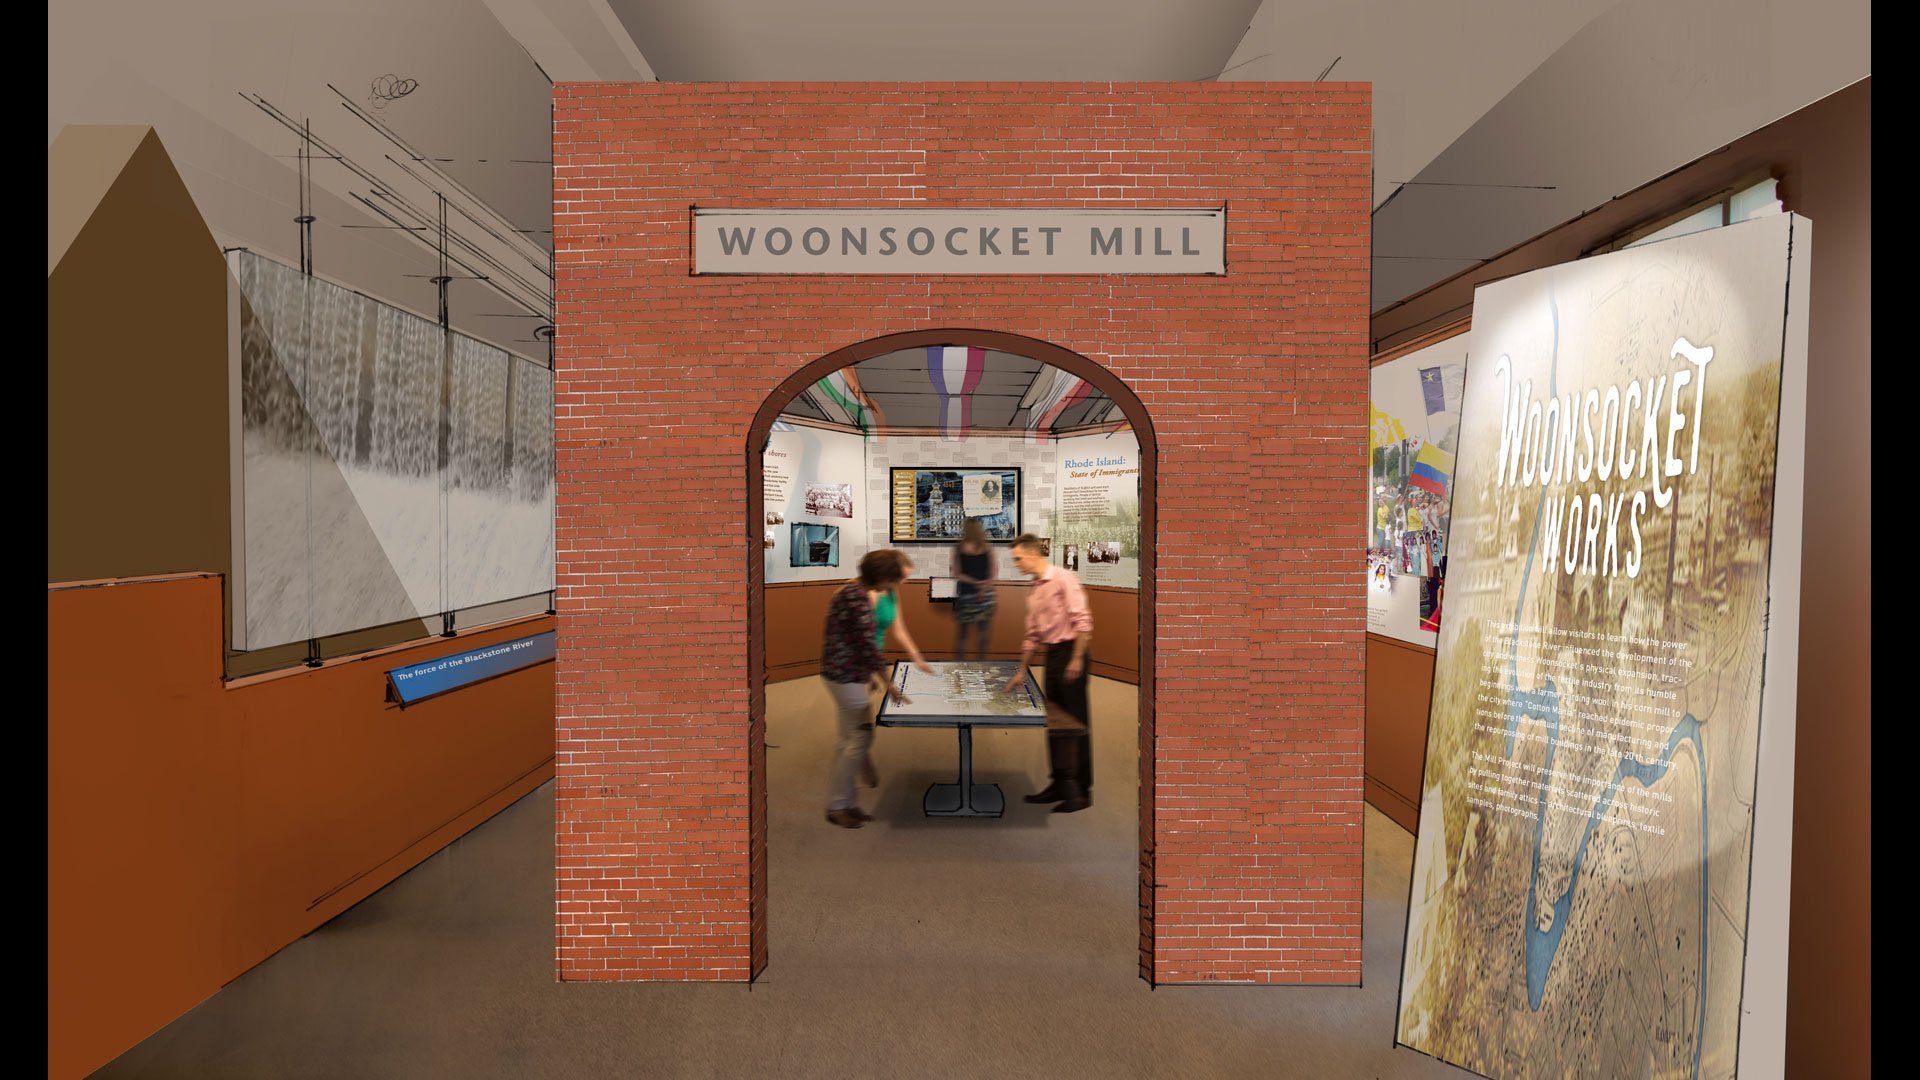 This multi-touch gestural interface exhibit uses the Blackstone River as a metaphor for change; visitors learn about how the mills changed the historical landscape of Woonsocket, RI. The interface allows multiple users to access a series of maps tapping into deeper content depending on the visitor’s interest.